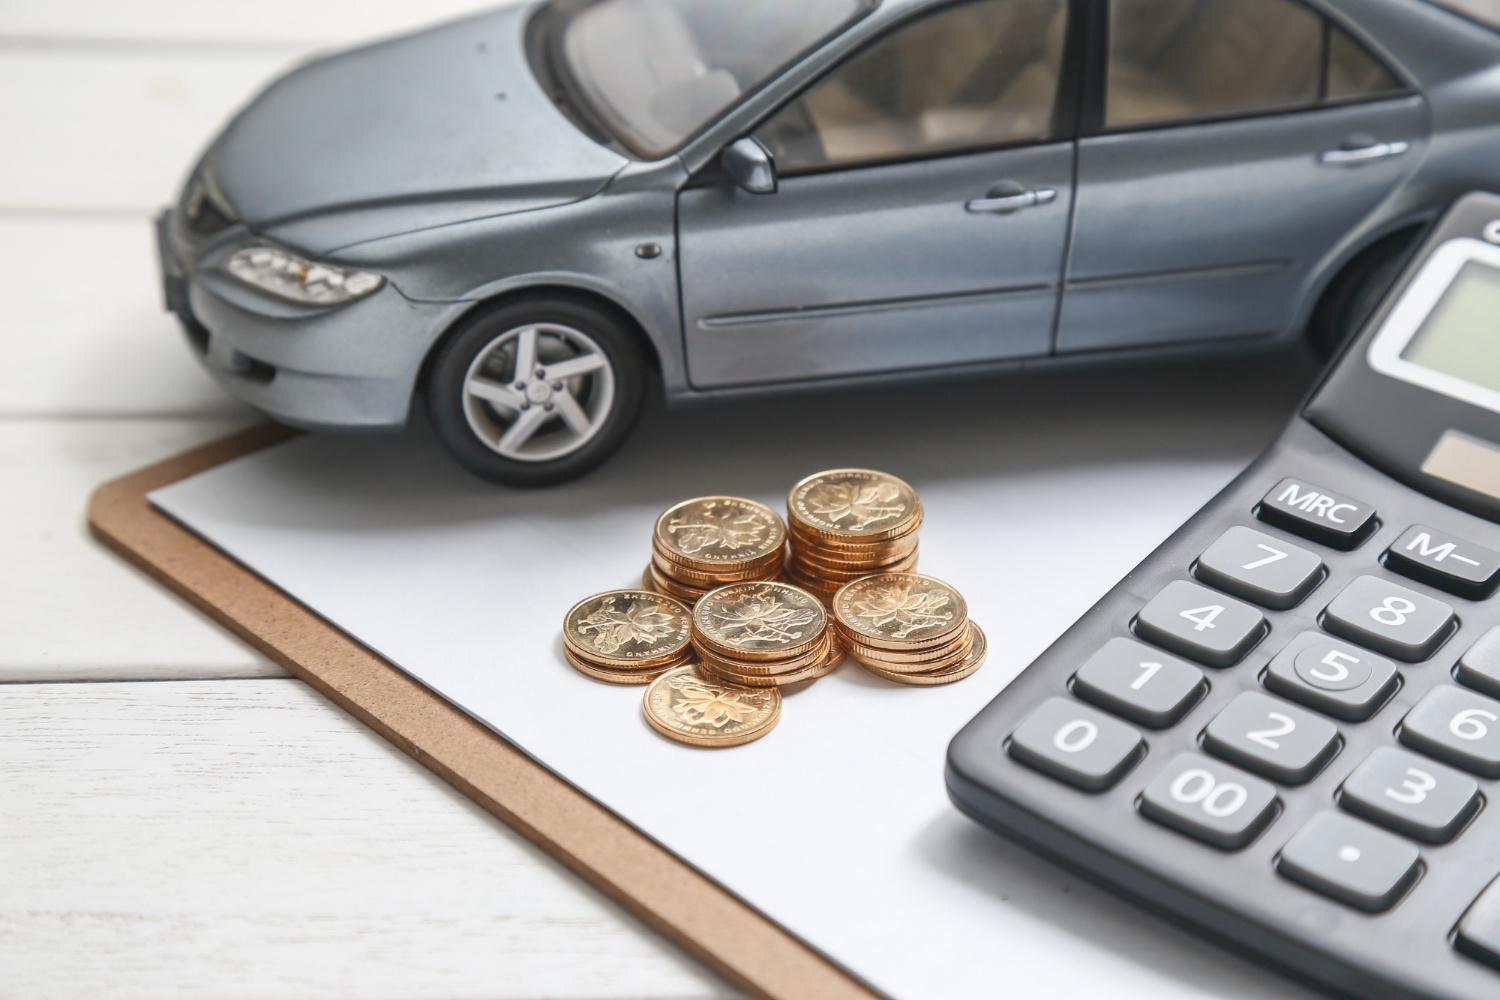 Don't let bad credit prevent you from getting the car you need. Source: Freepik.